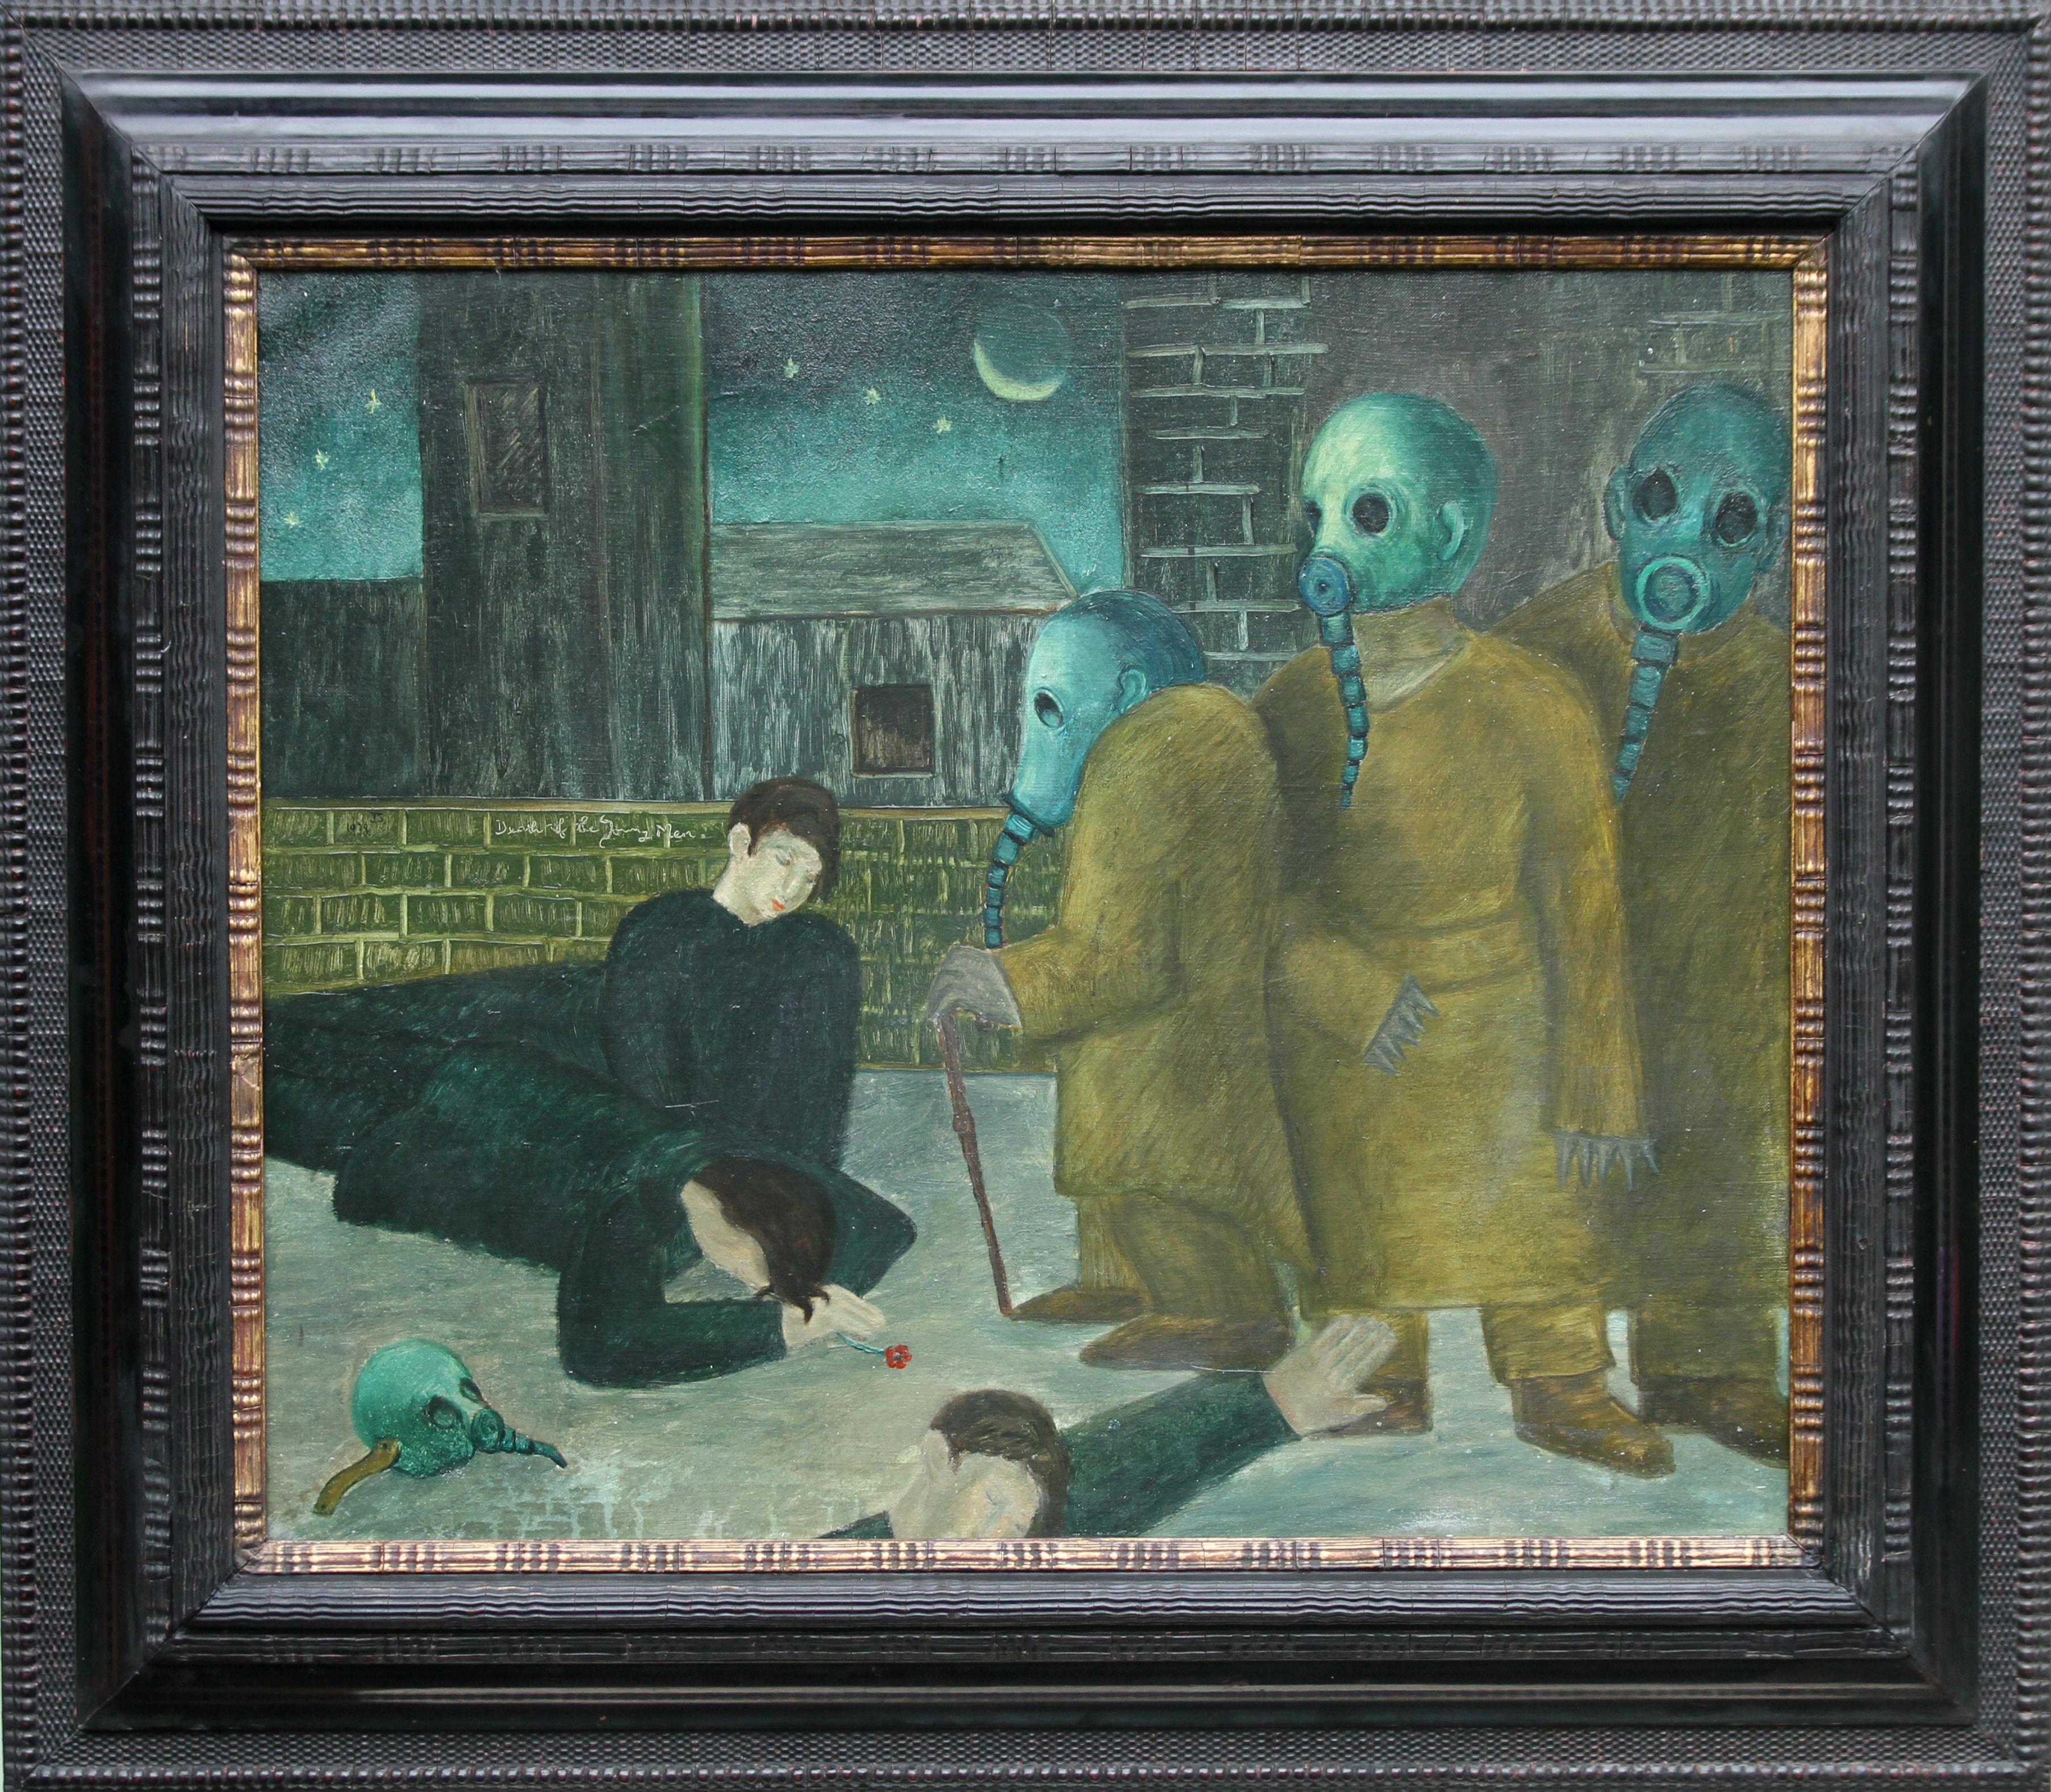 Jack Sassoon Portrait Painting - Death of the Young Men 1938 - British art figurative Surrealist oil painting